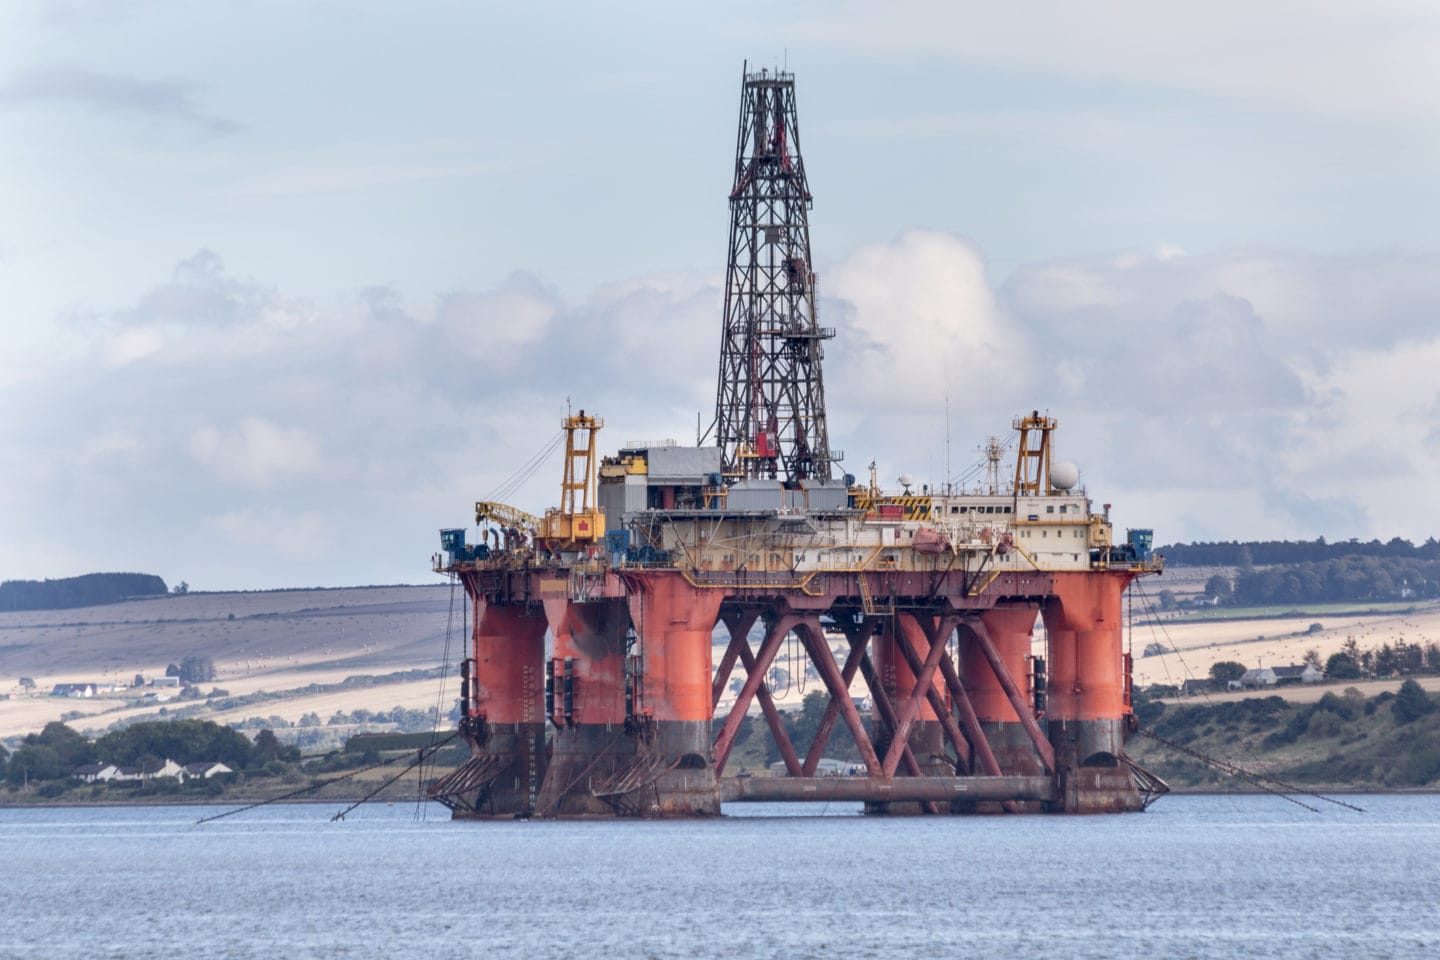 £250bn: the cost of giving tax breaks to North Sea oil firms